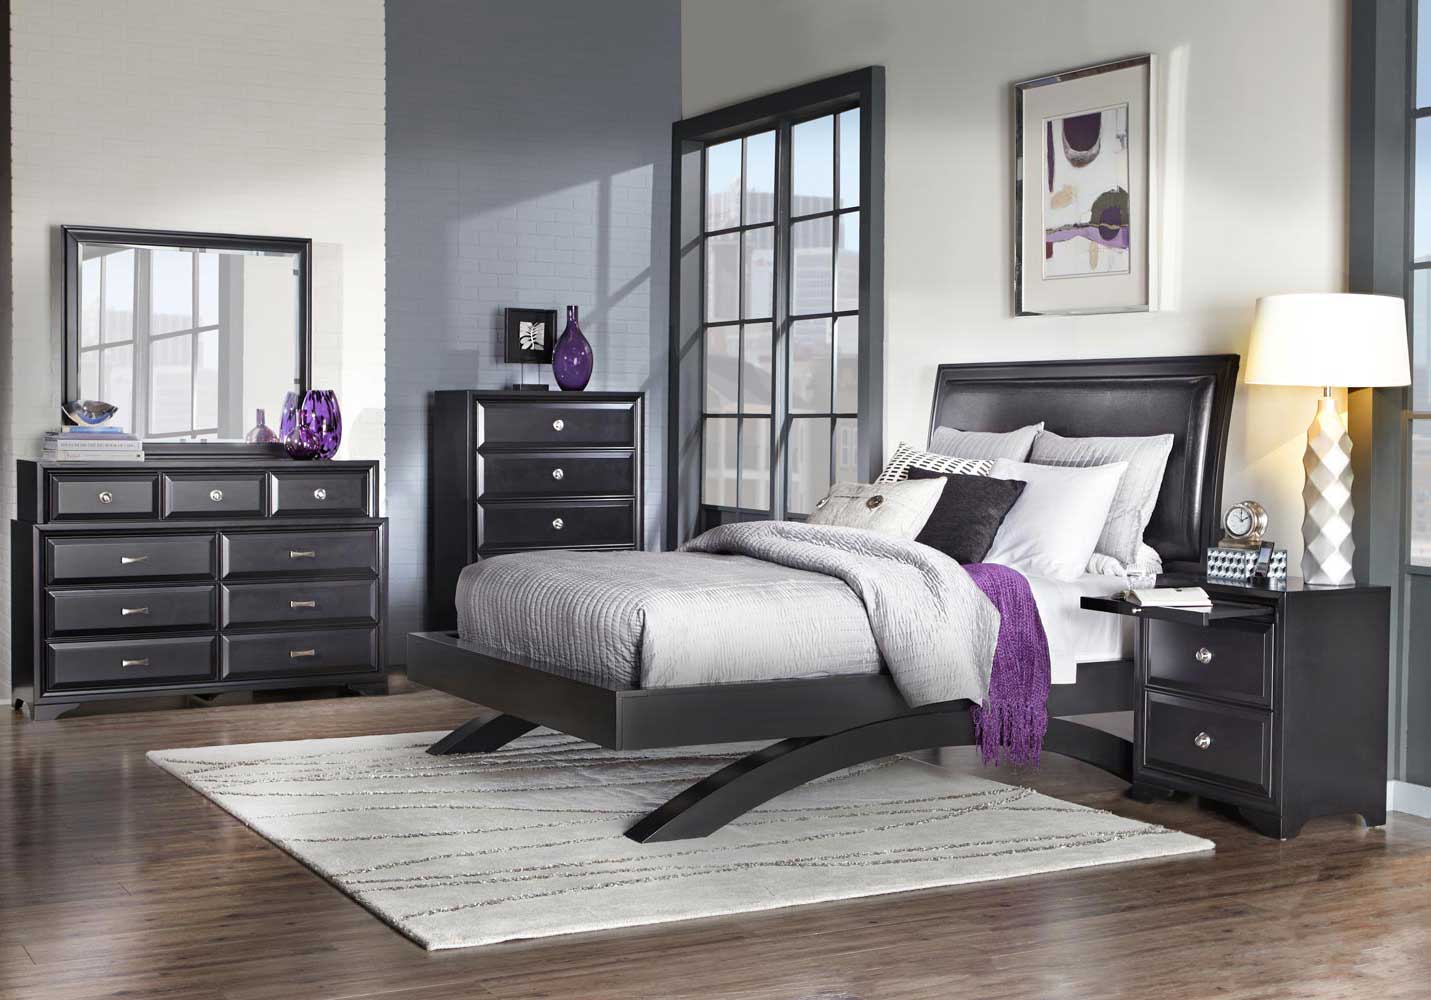 Stores For Bedroom Decor